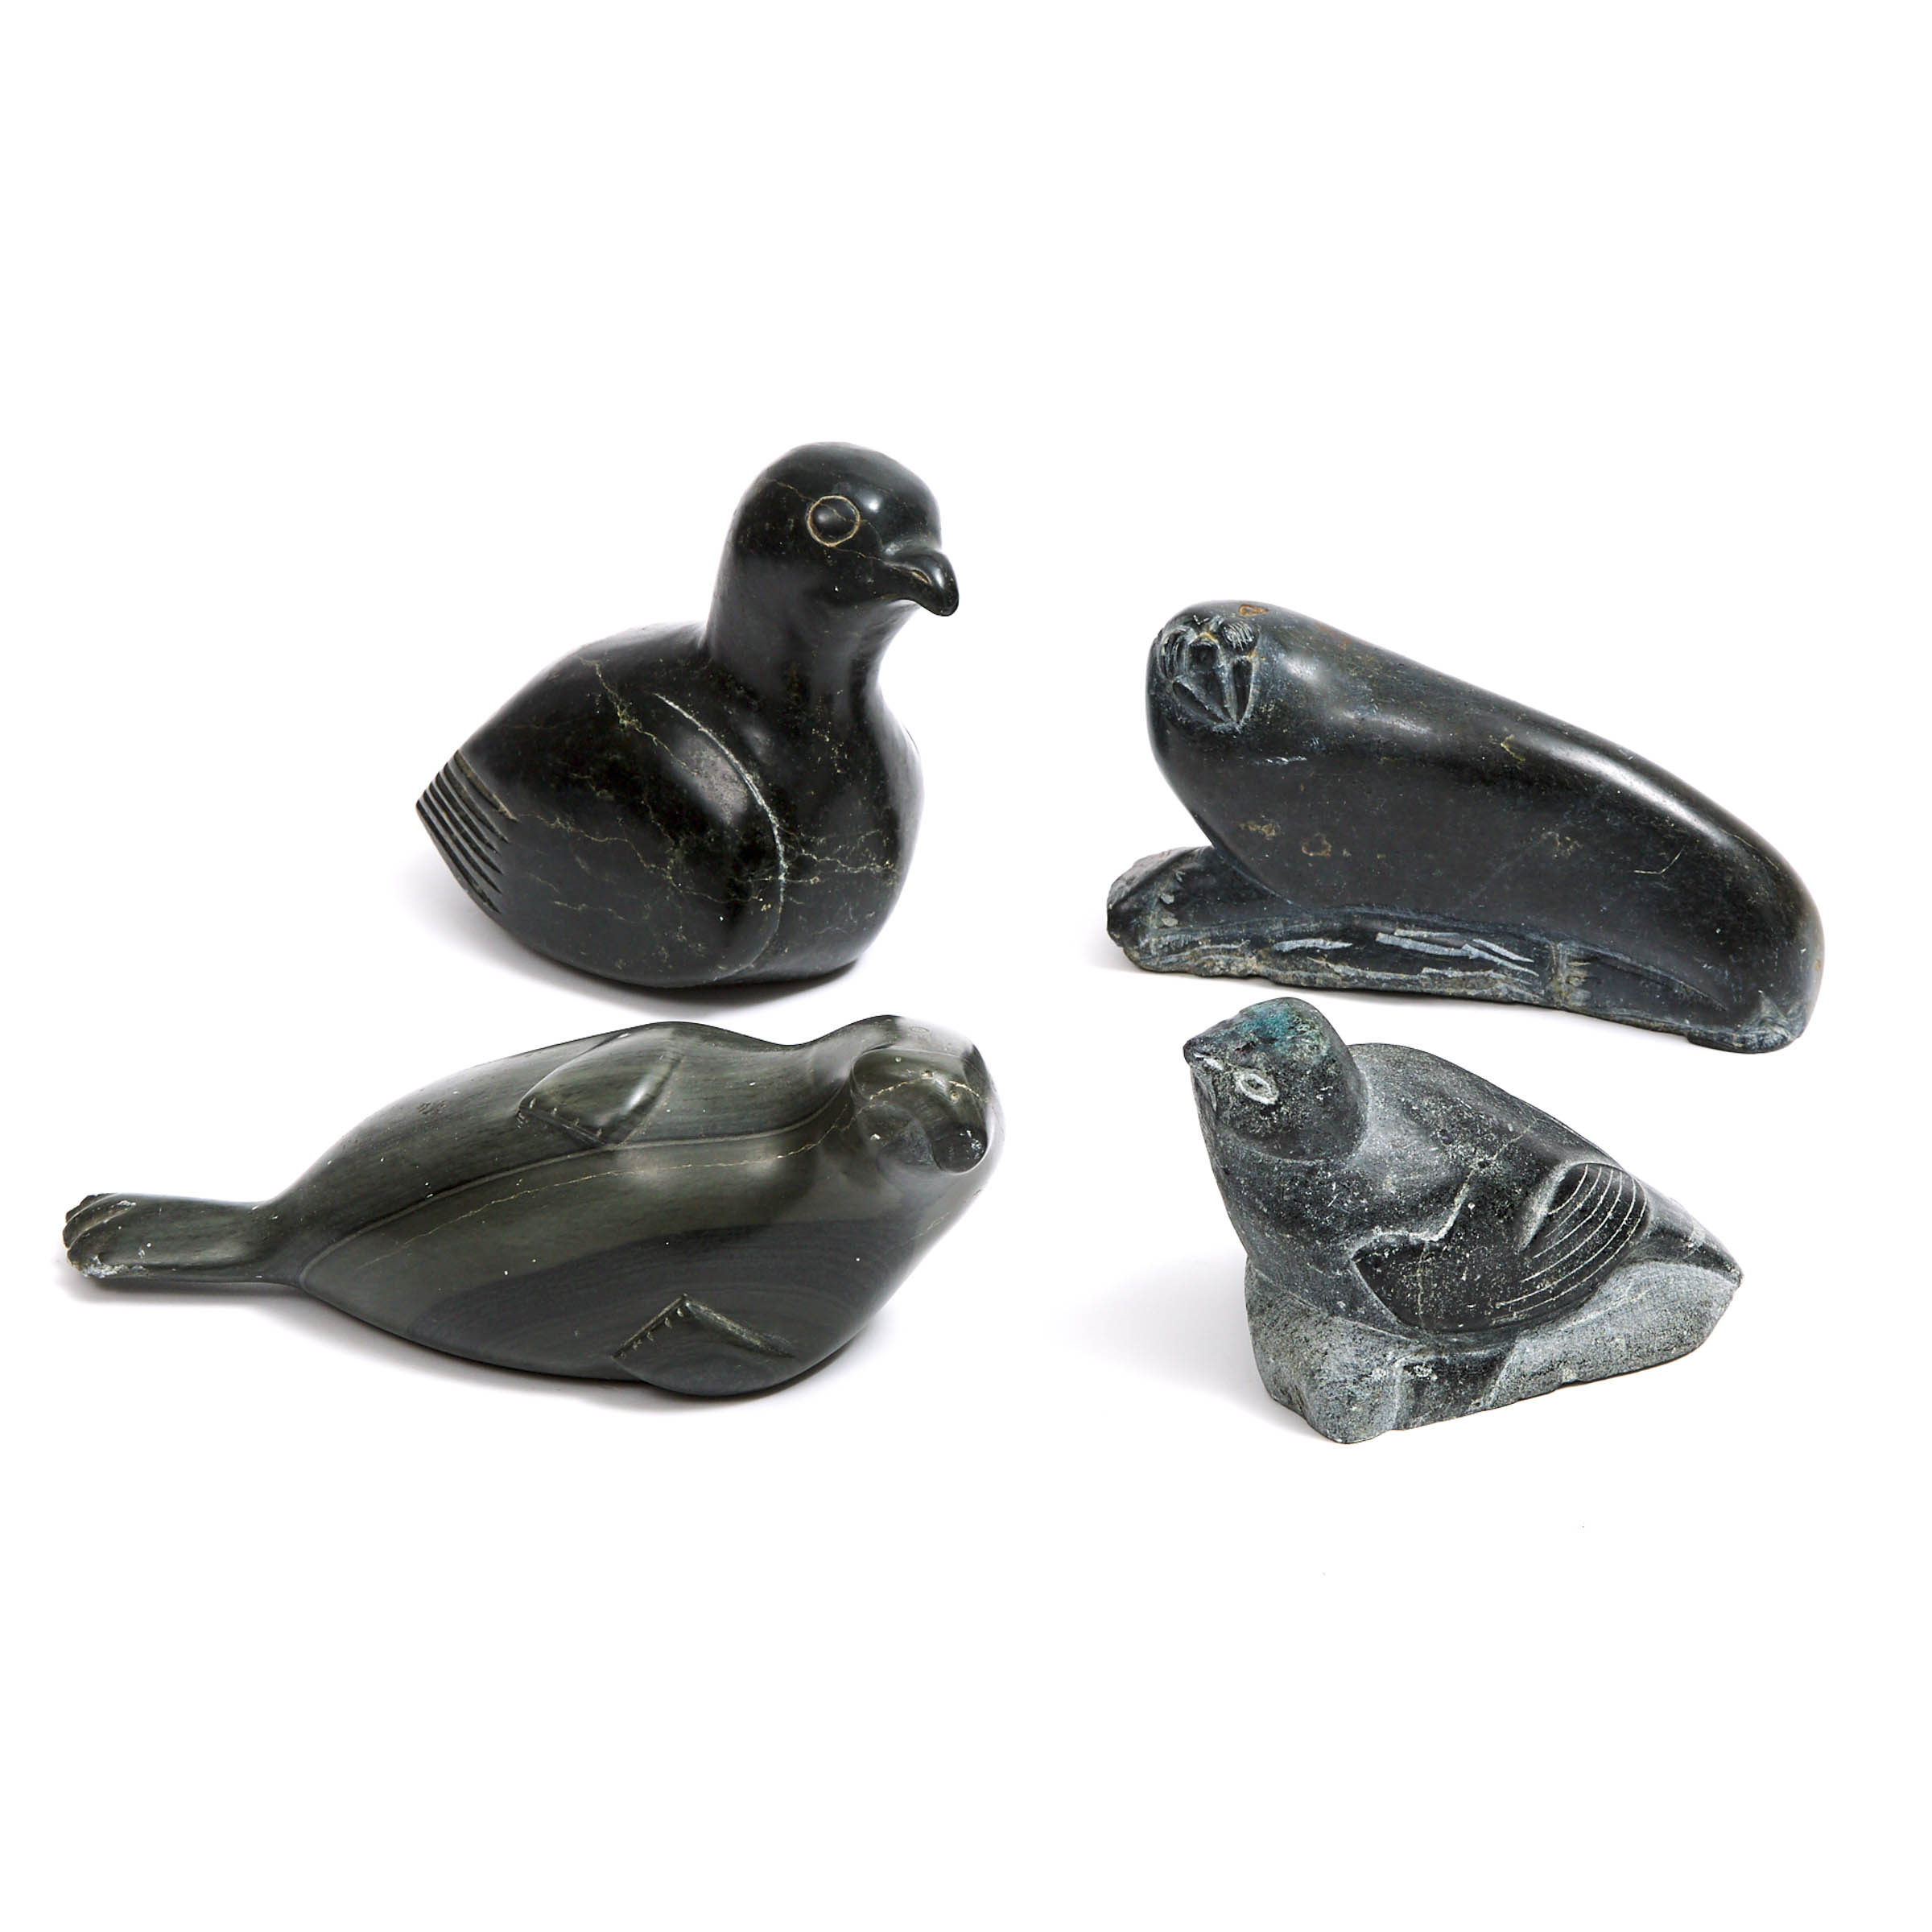 A COLLECTION OF INUIT CARVINGS OF BIRDS AND SEALS